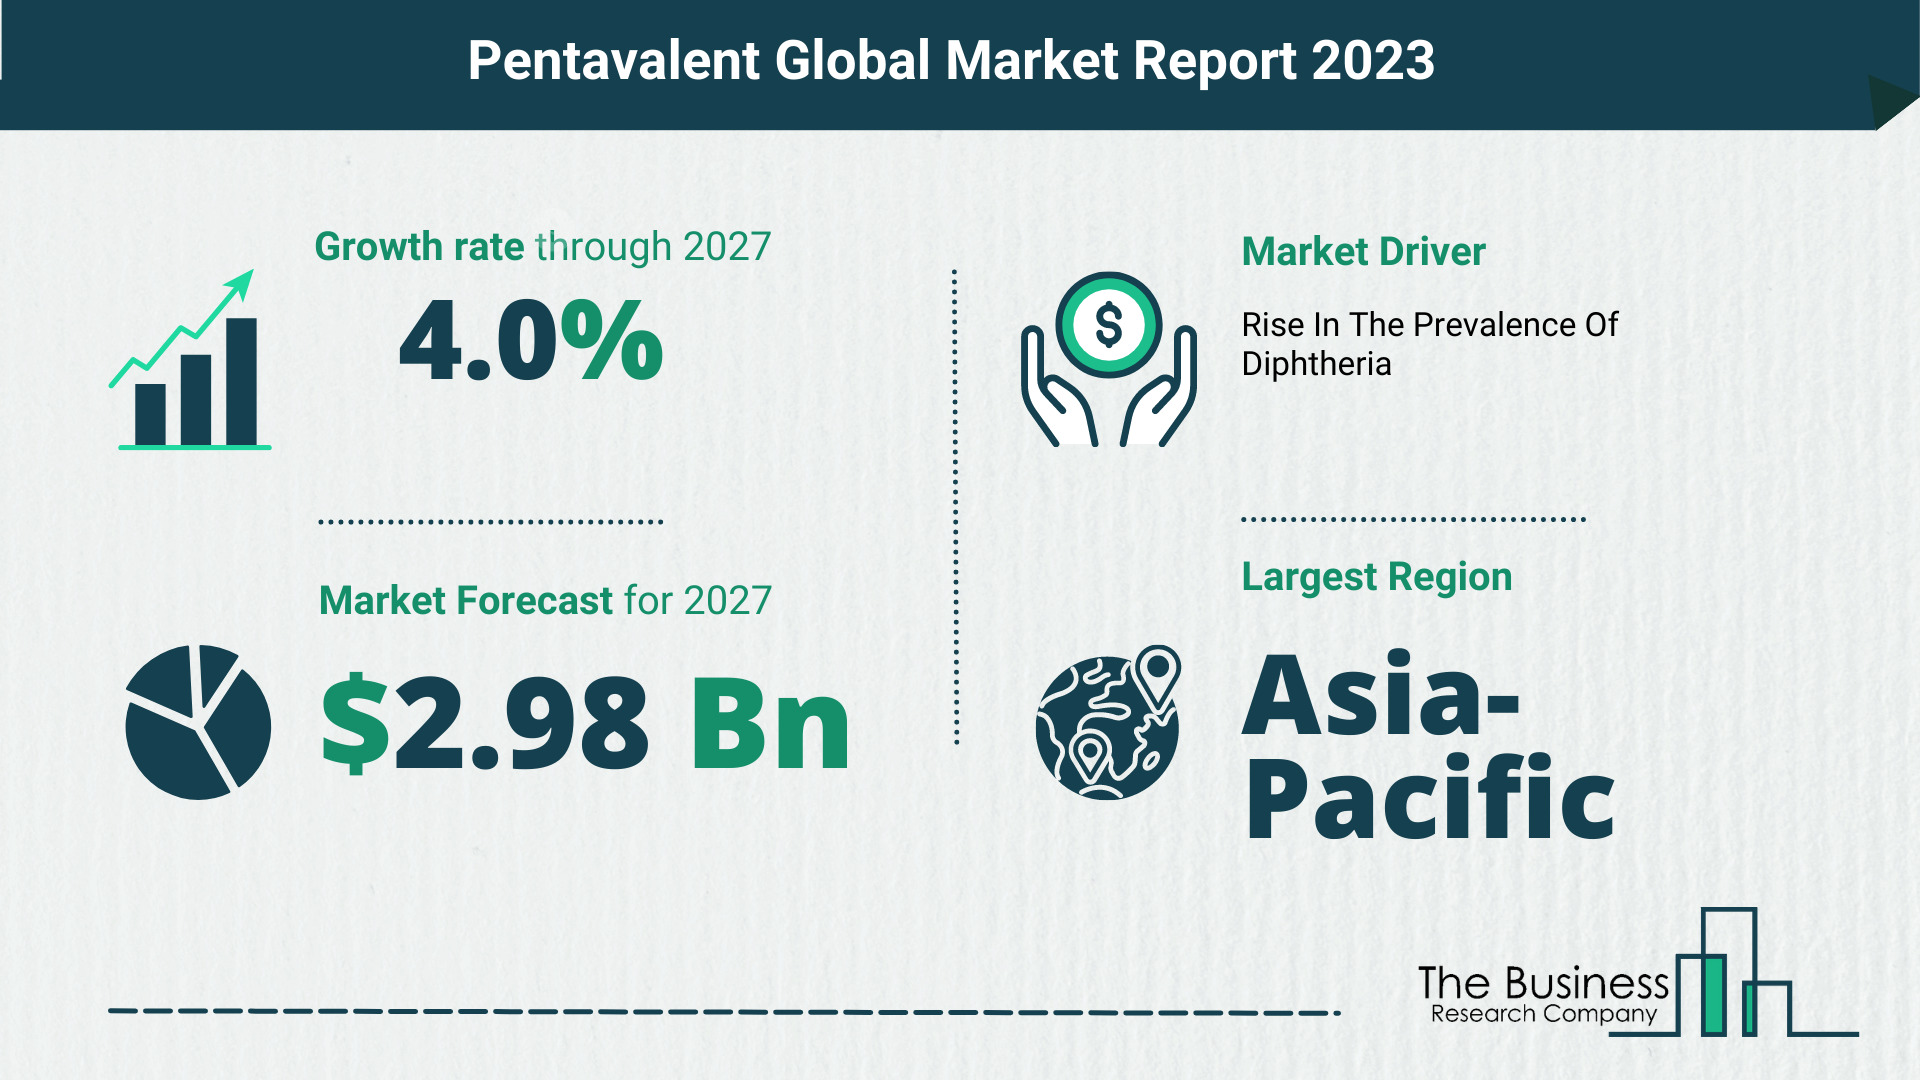 Global Pentavalent Market Opportunities And Strategies 2023